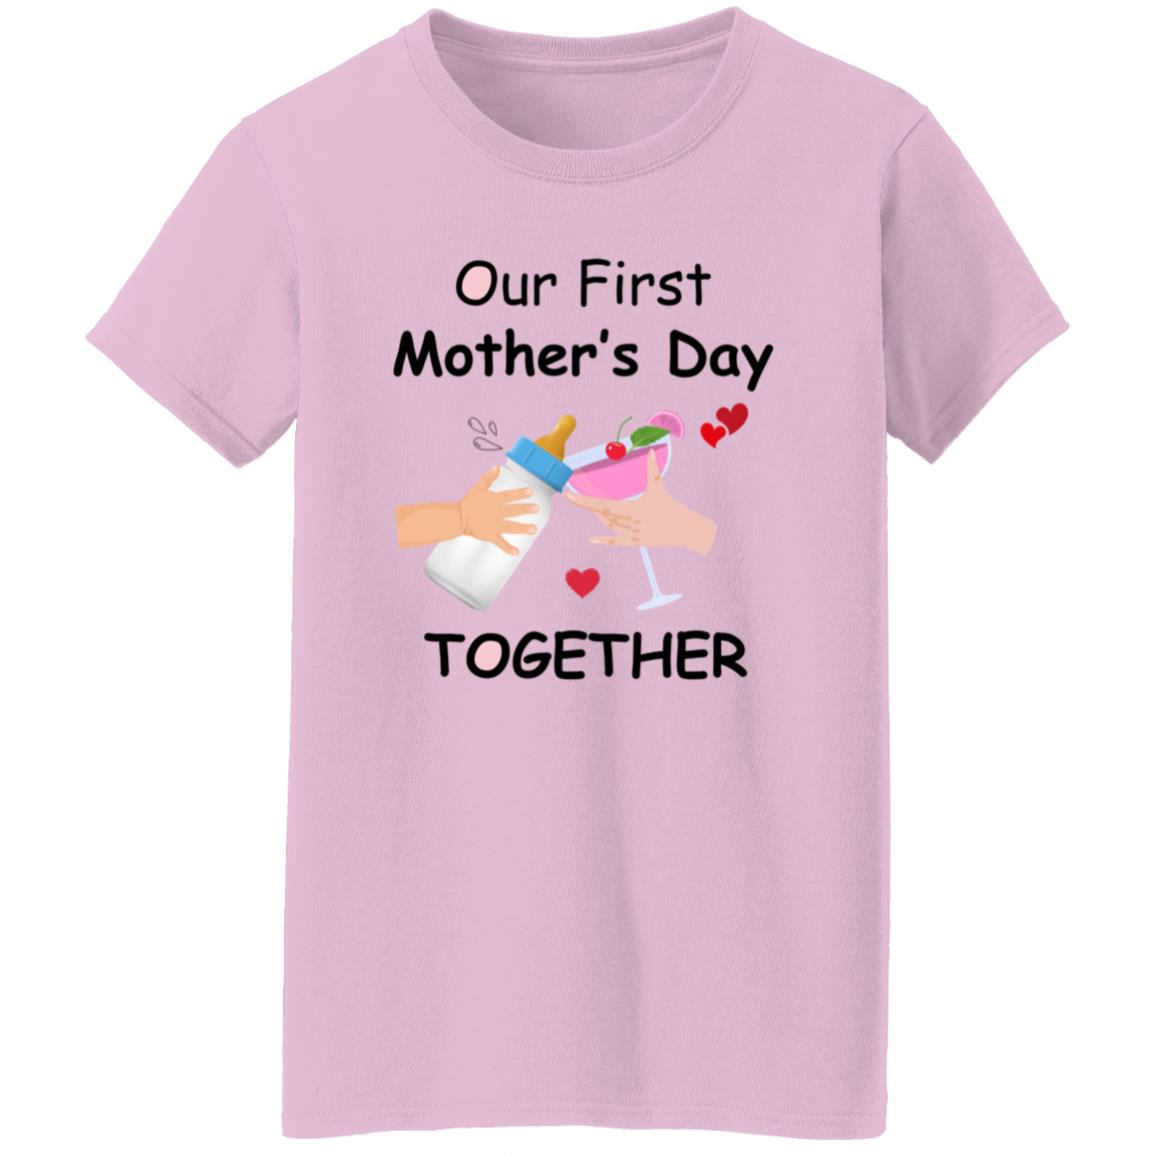 Our First Mother's Day Together |Mom T-Shirt